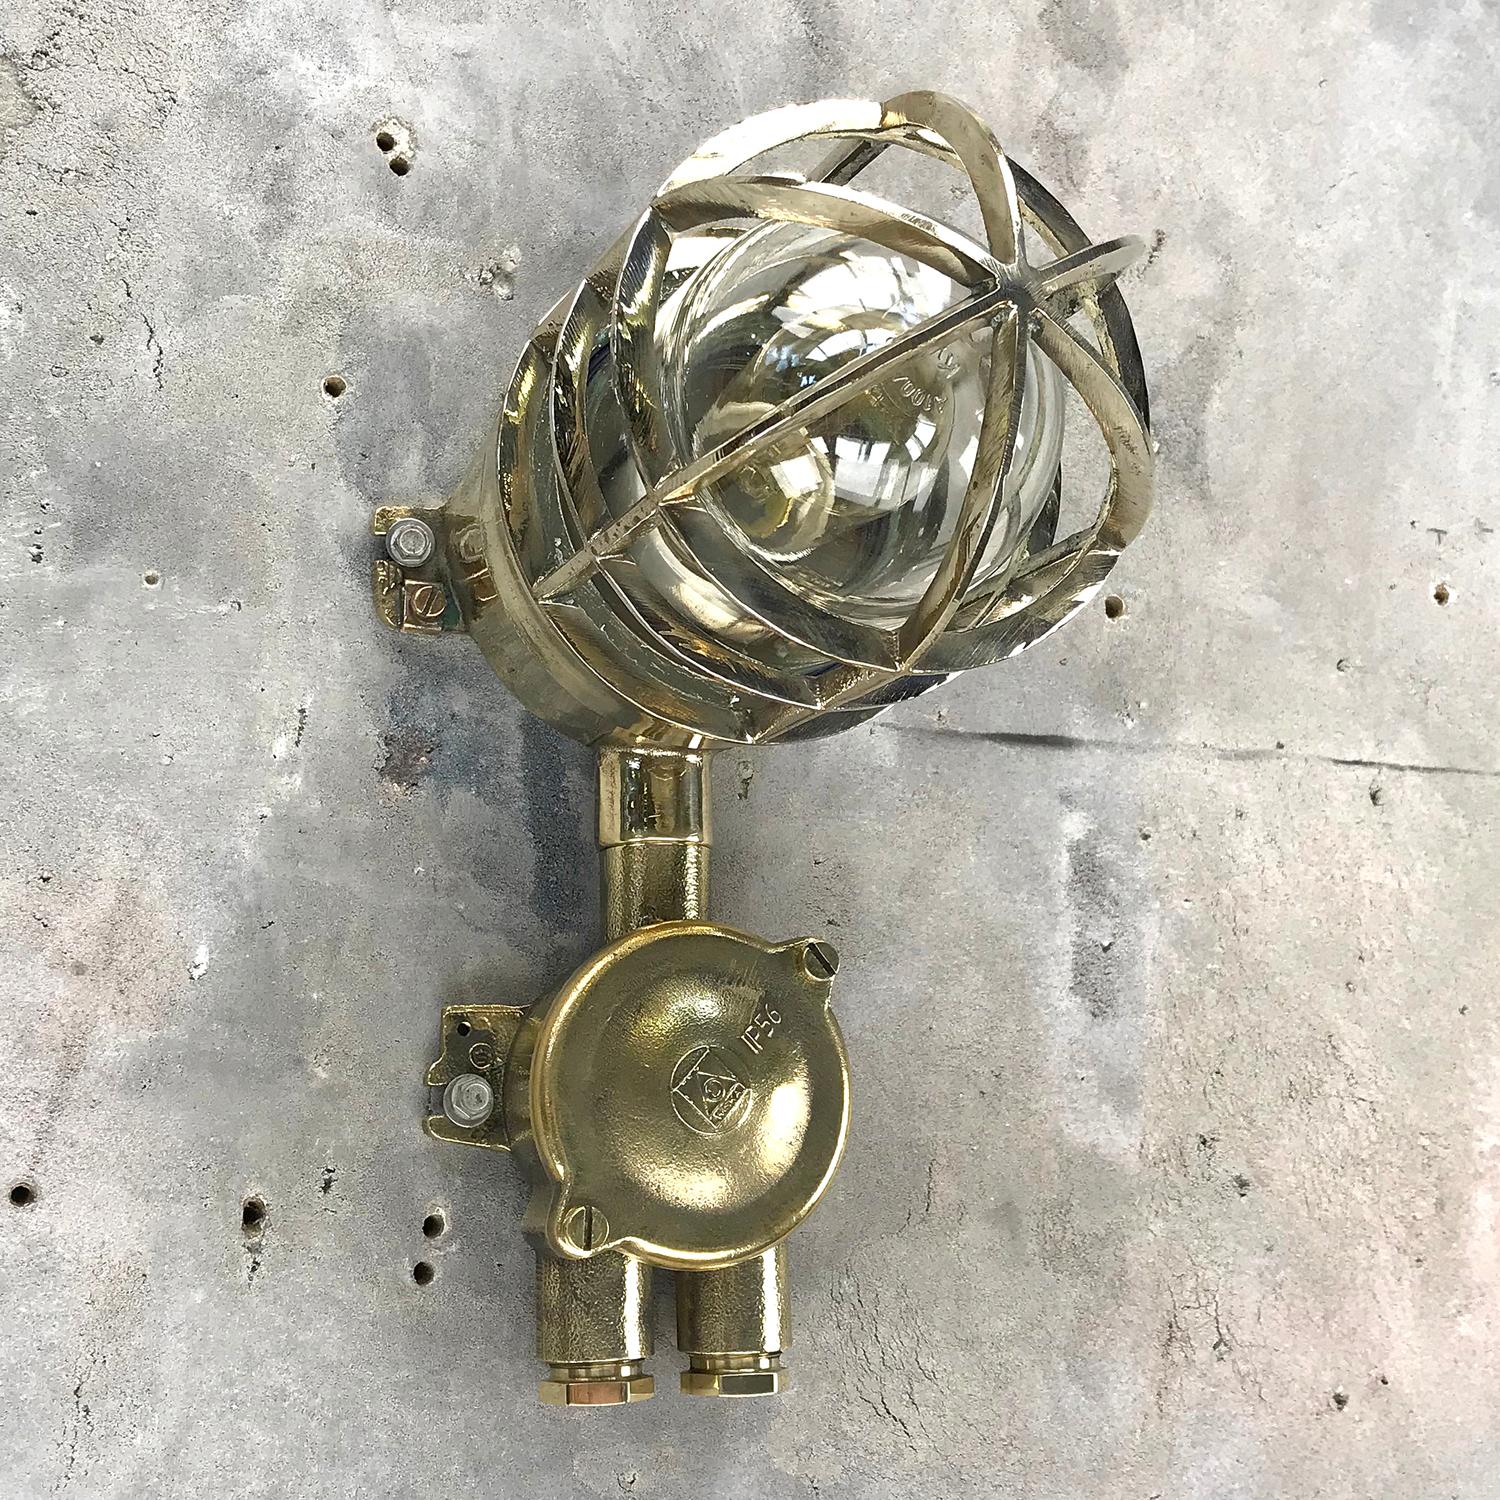 Bronze 1970s German Explosion Proof Wall Light Cast Brass, Glass Shade and Junction Box